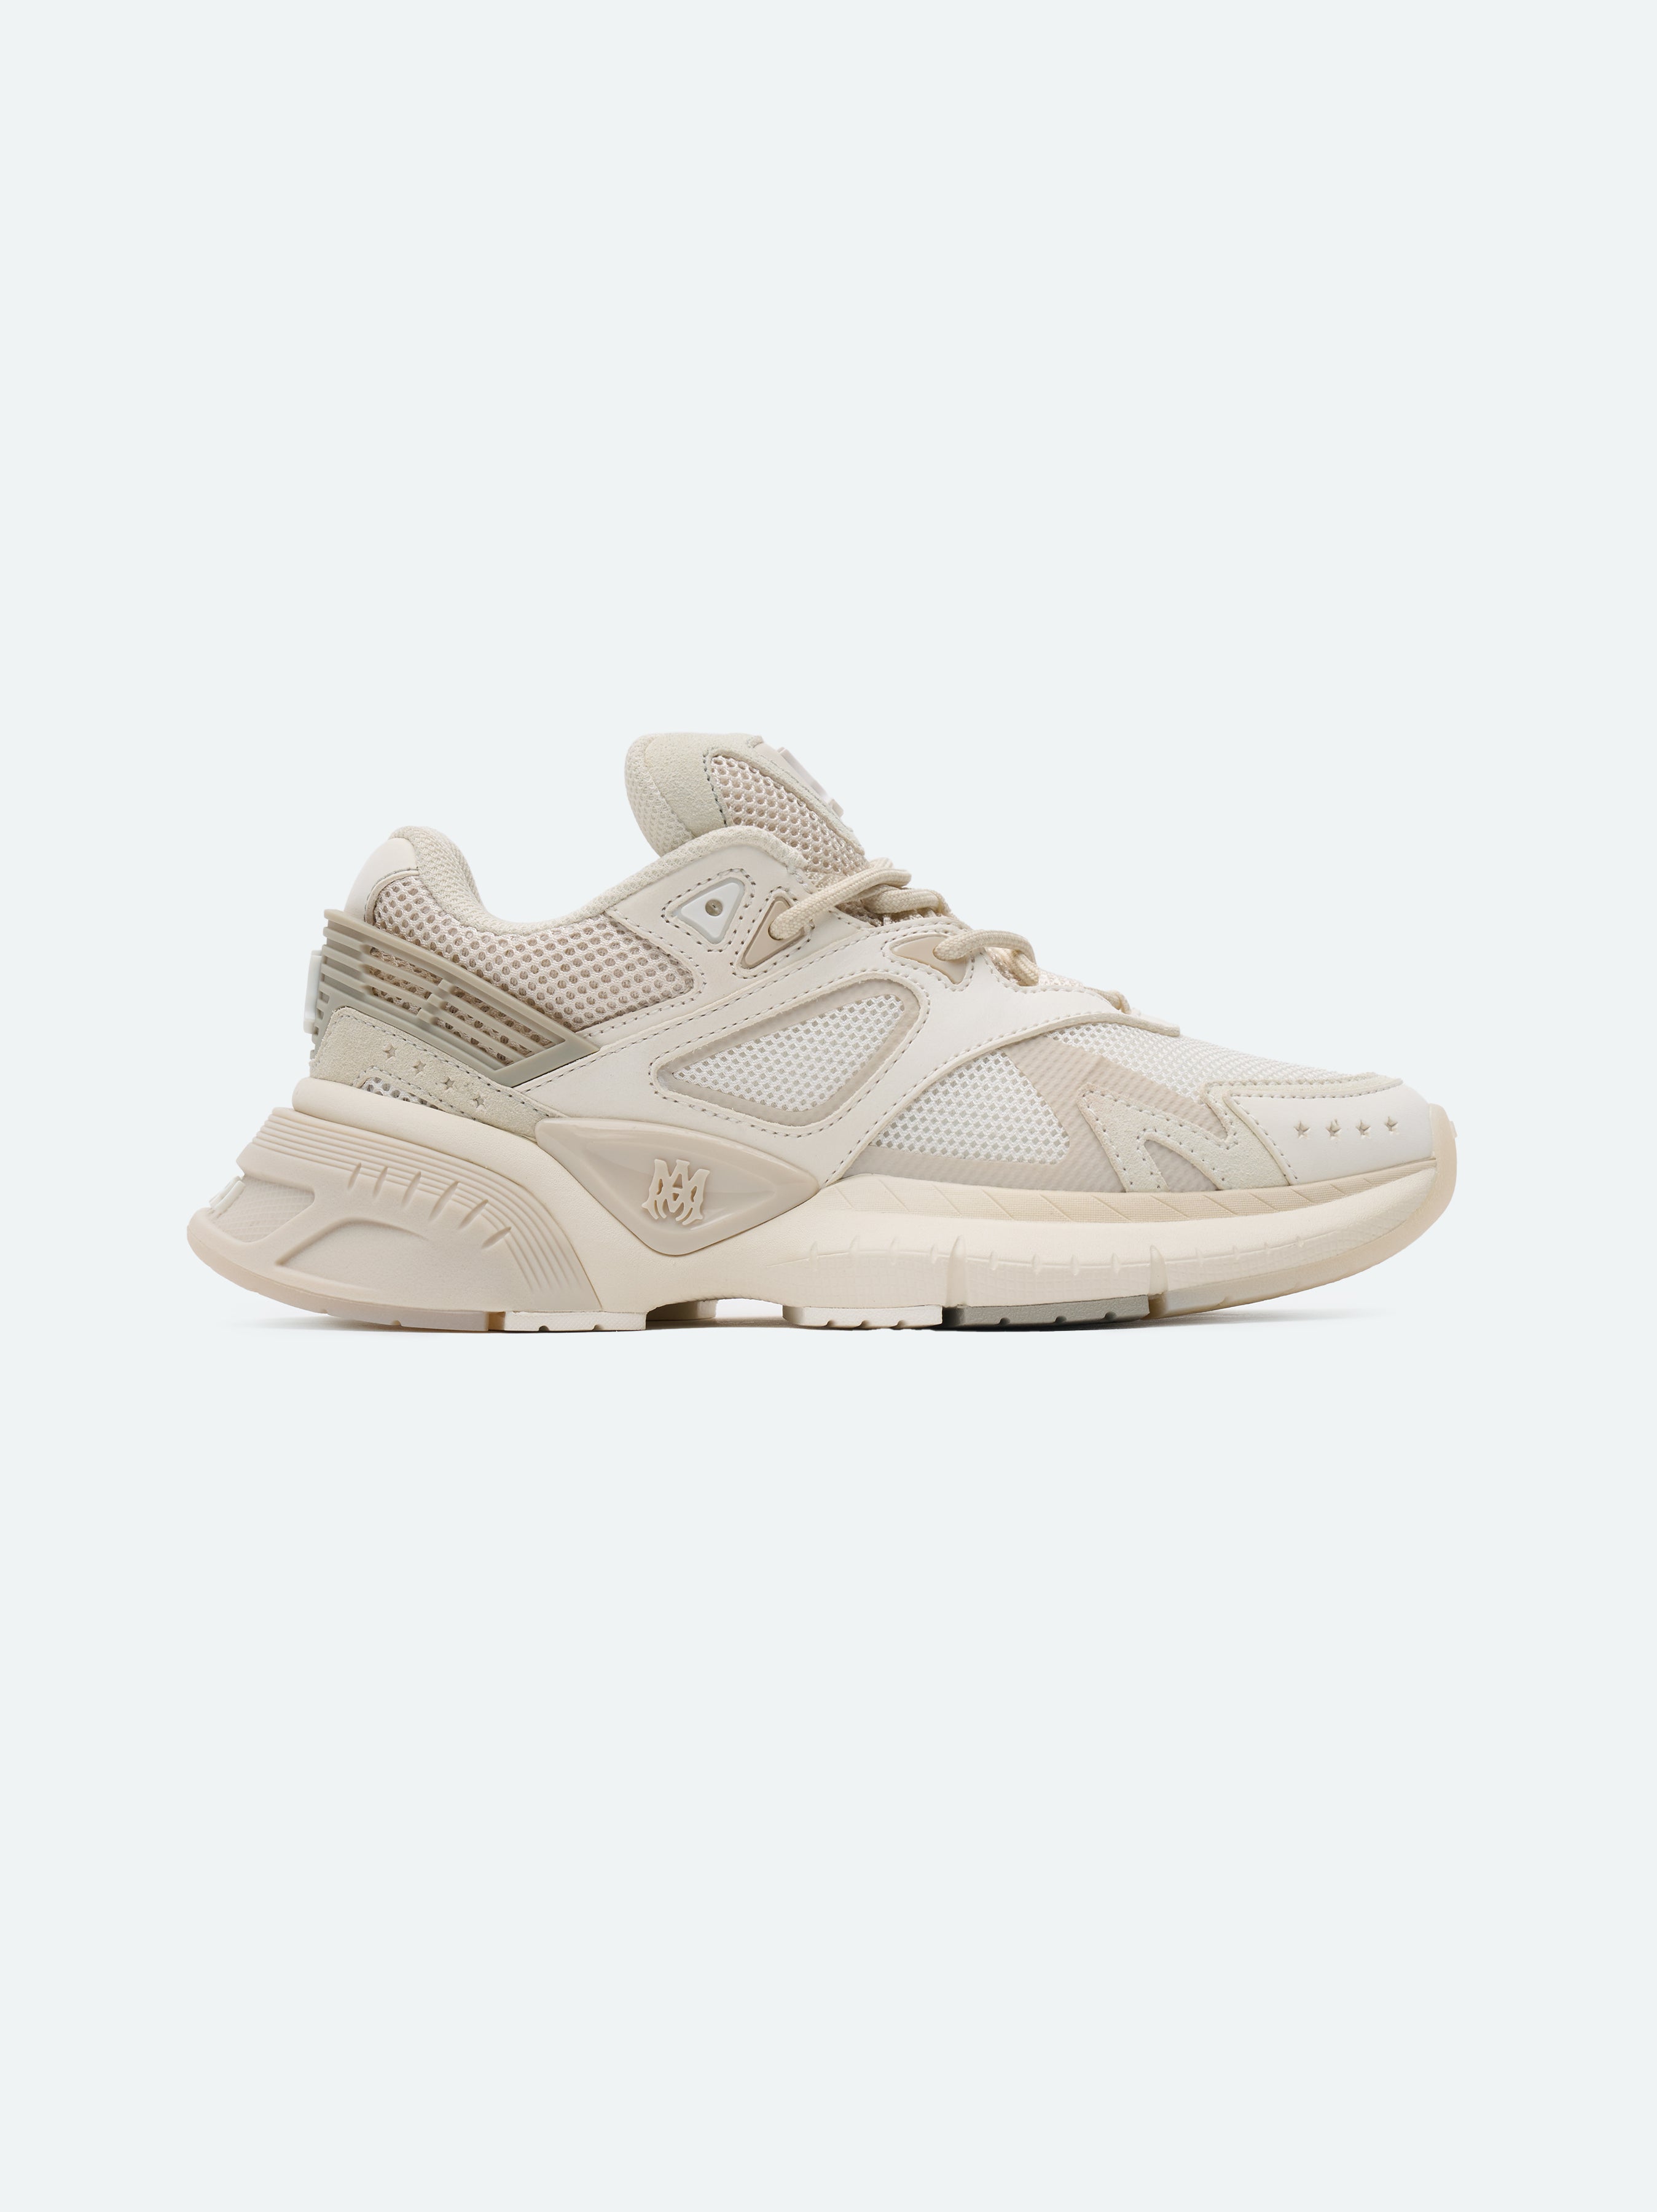 Product WOMEN - WOMEN'S MA RUNNER - Alabaster featured image